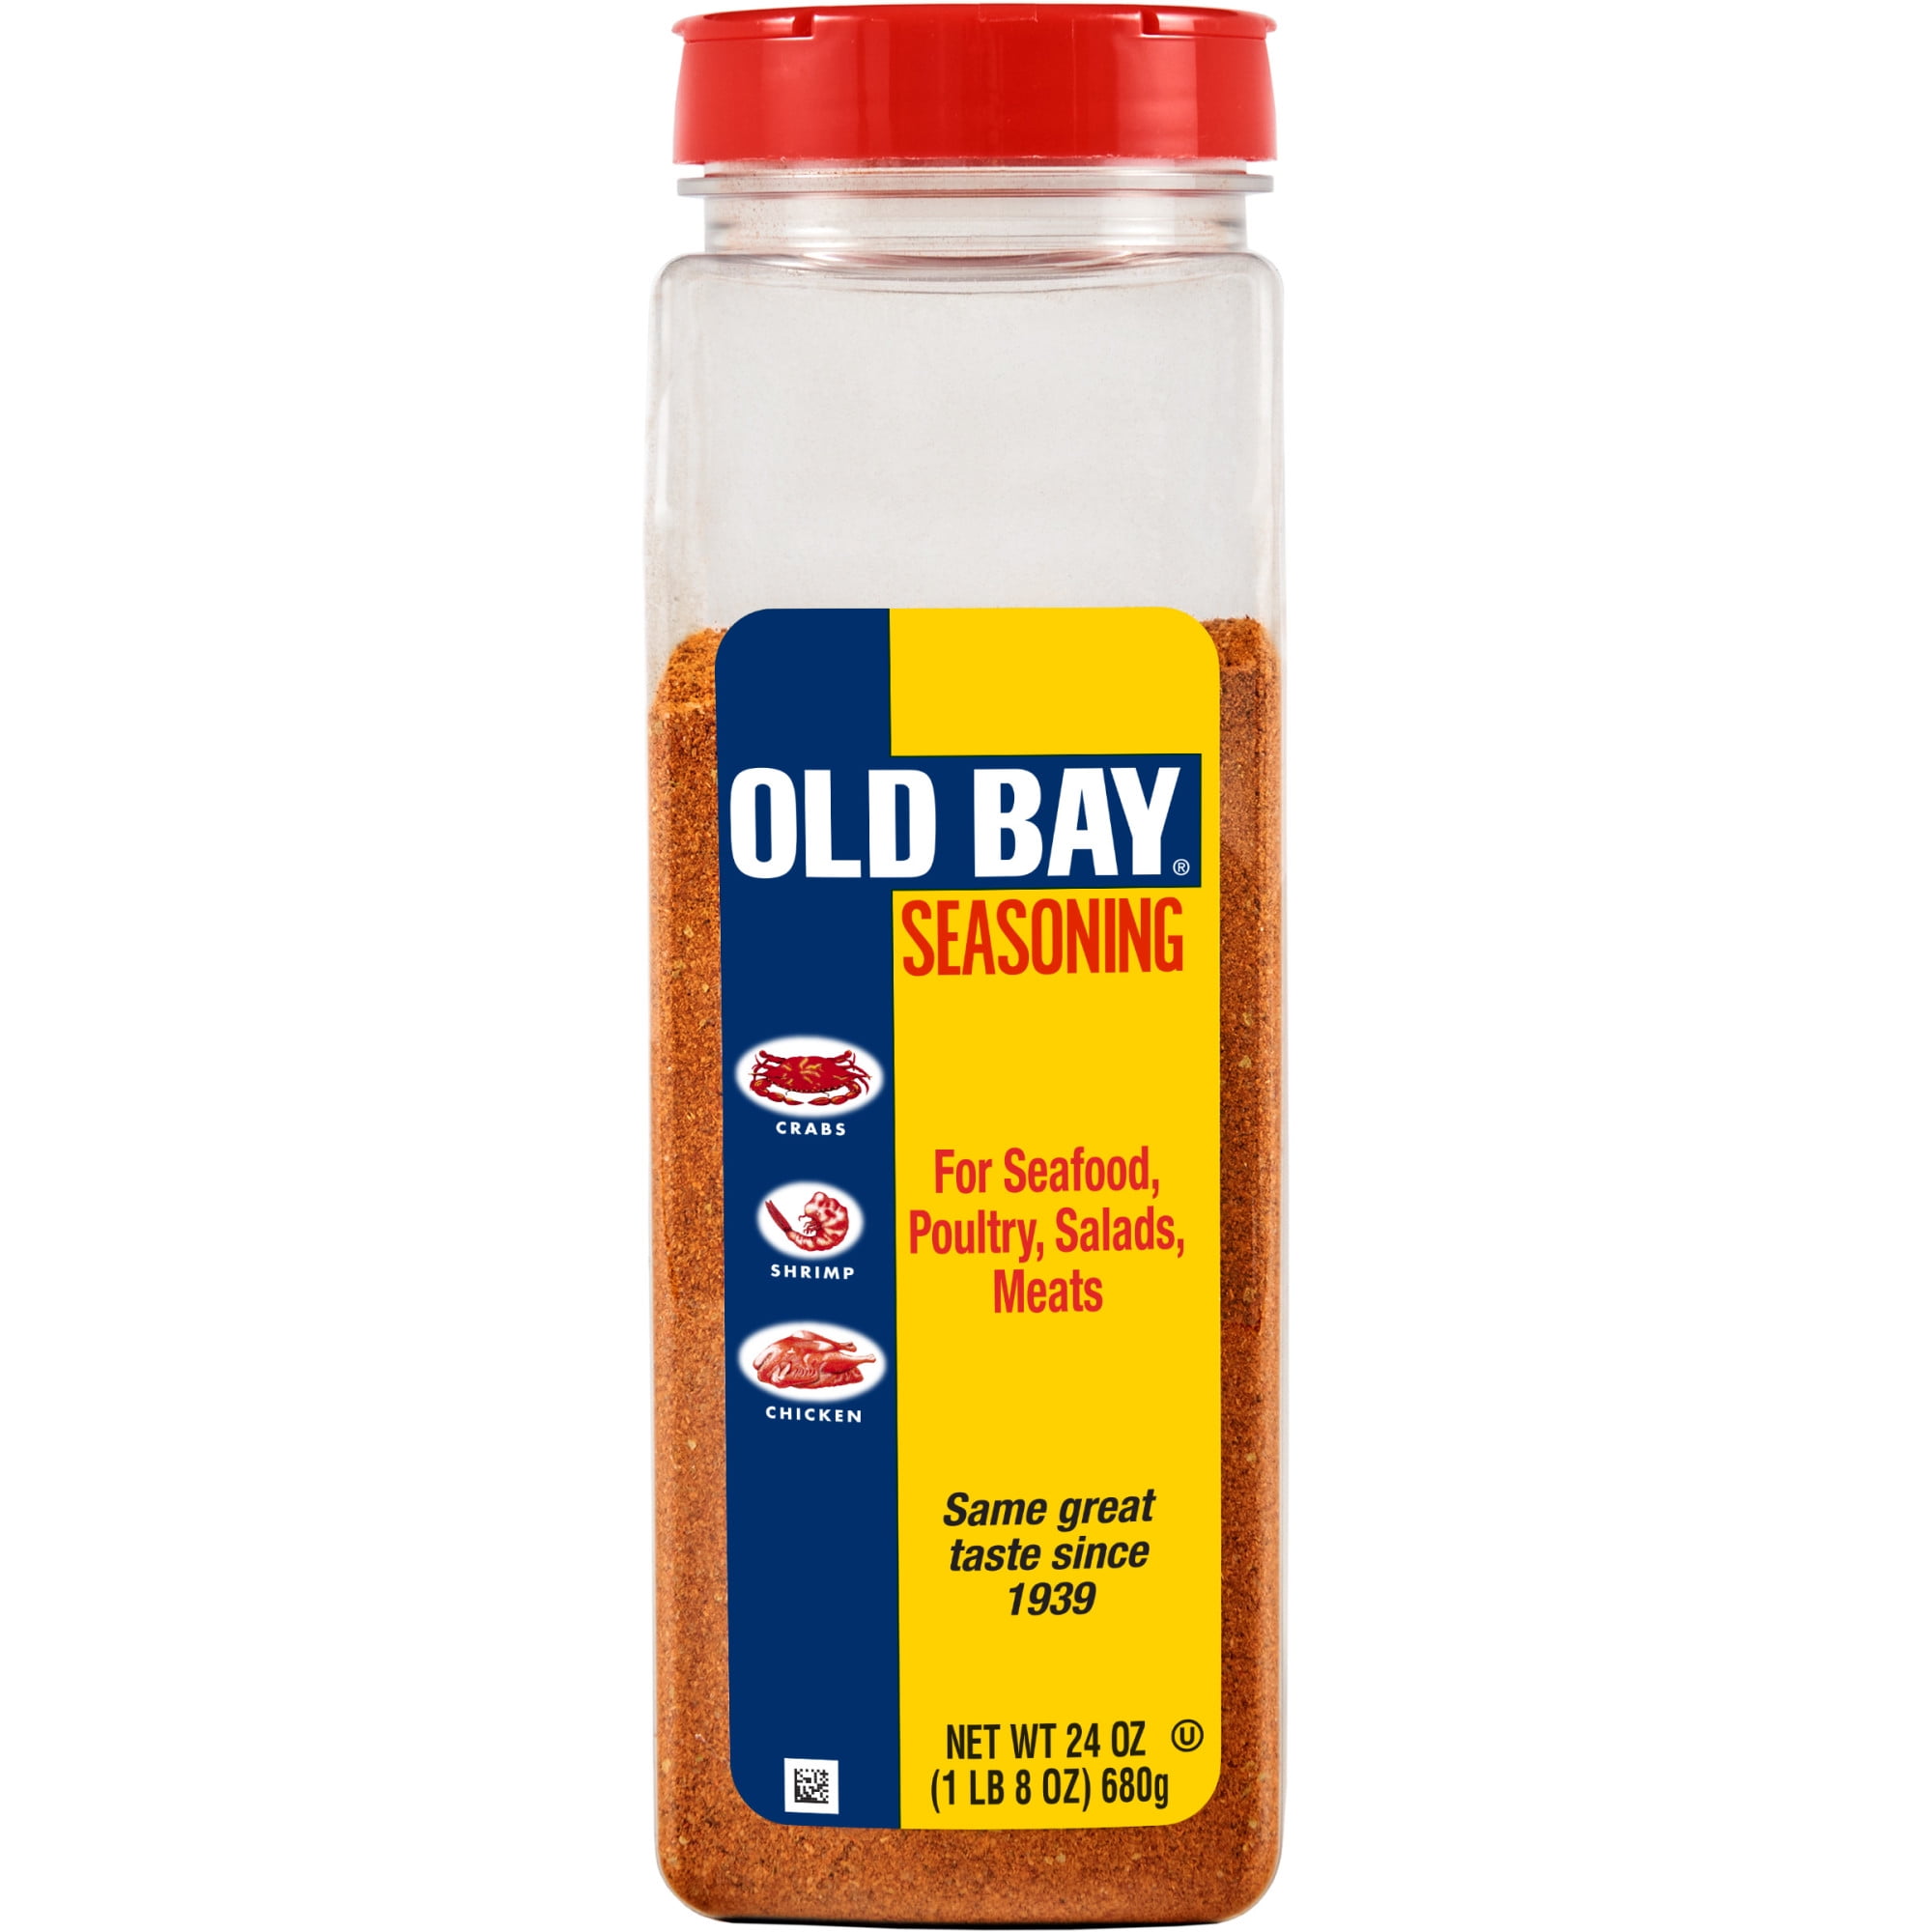 OLD BAY Seasoning, 24 oz - One 24 Ounce Container OLD BAY All